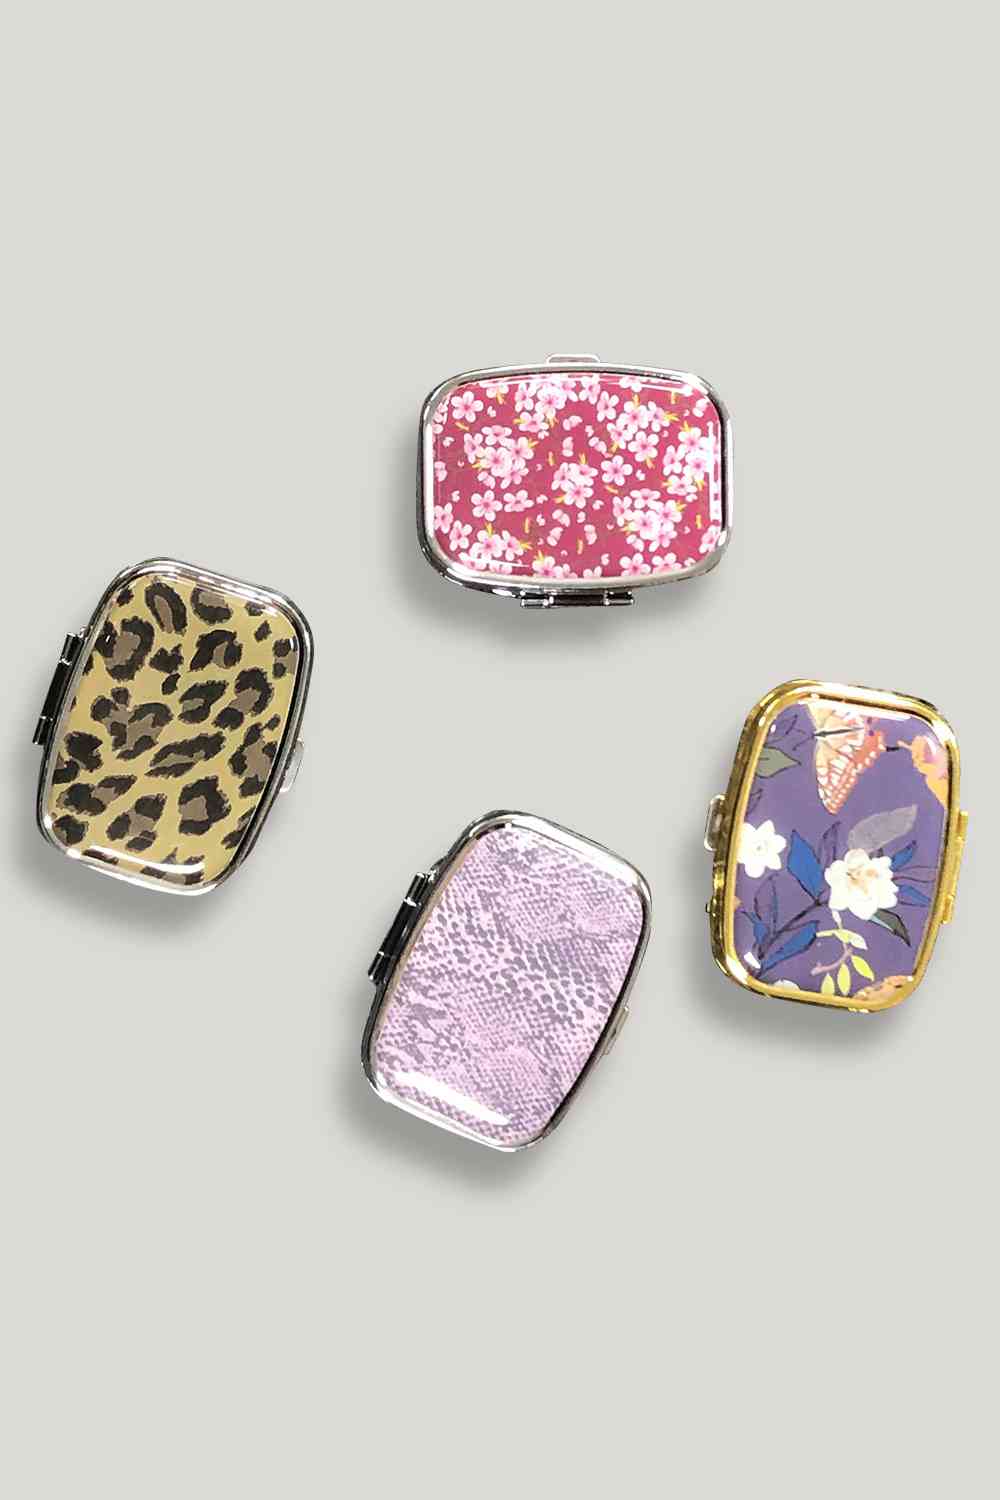 Mystery 4-Piece Metal Pill Cases